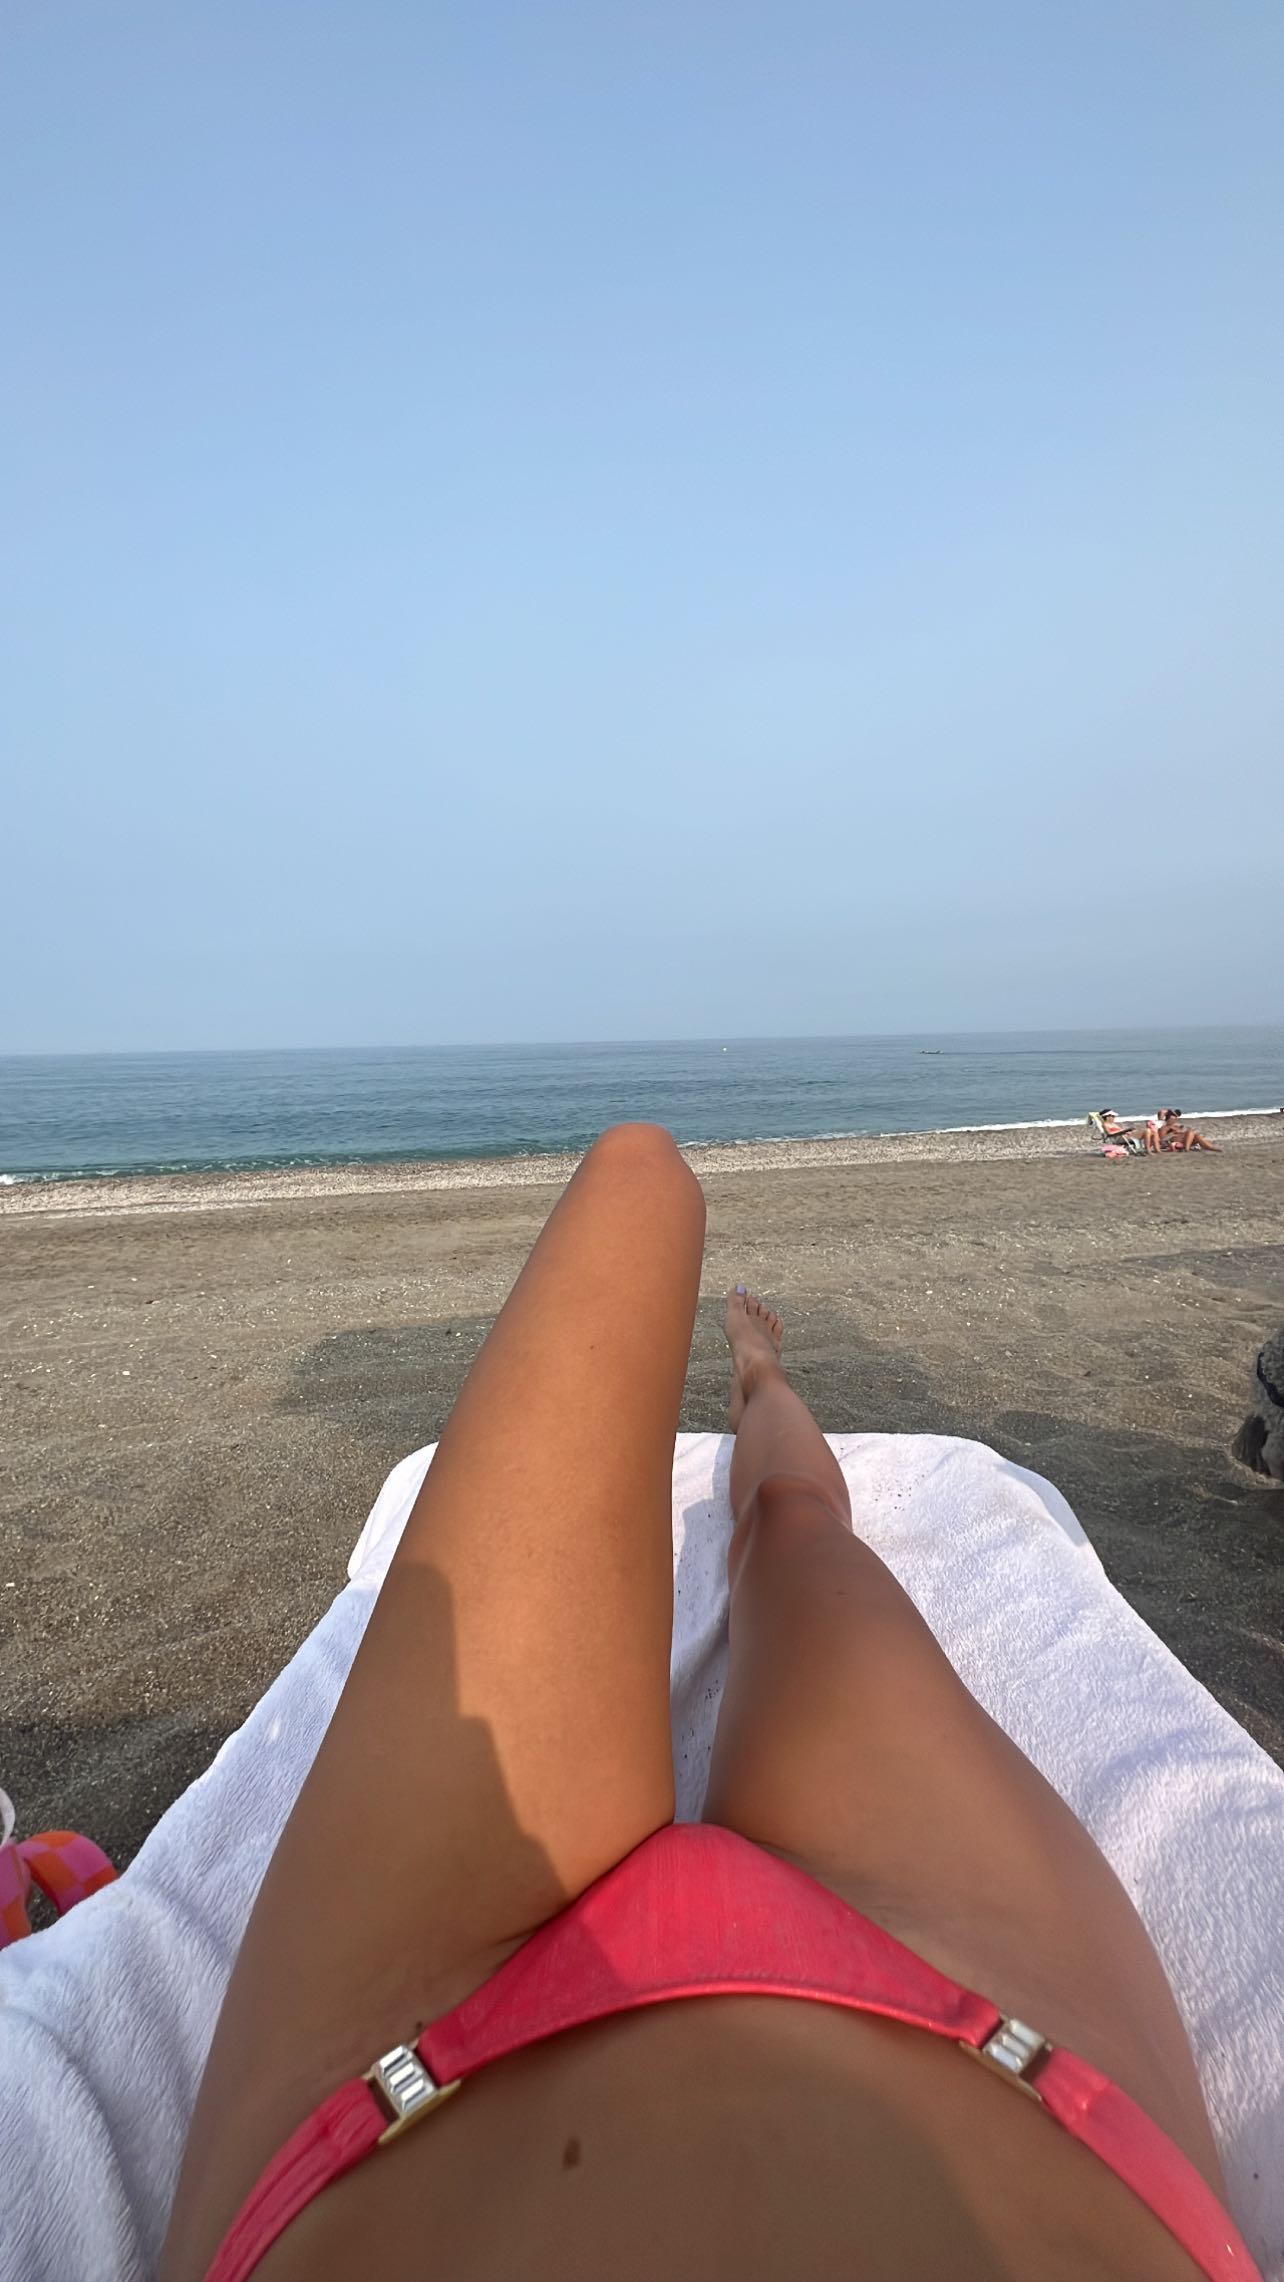 Teresi shared snaps of herself beachside during a vacation in Spain on Wednesday